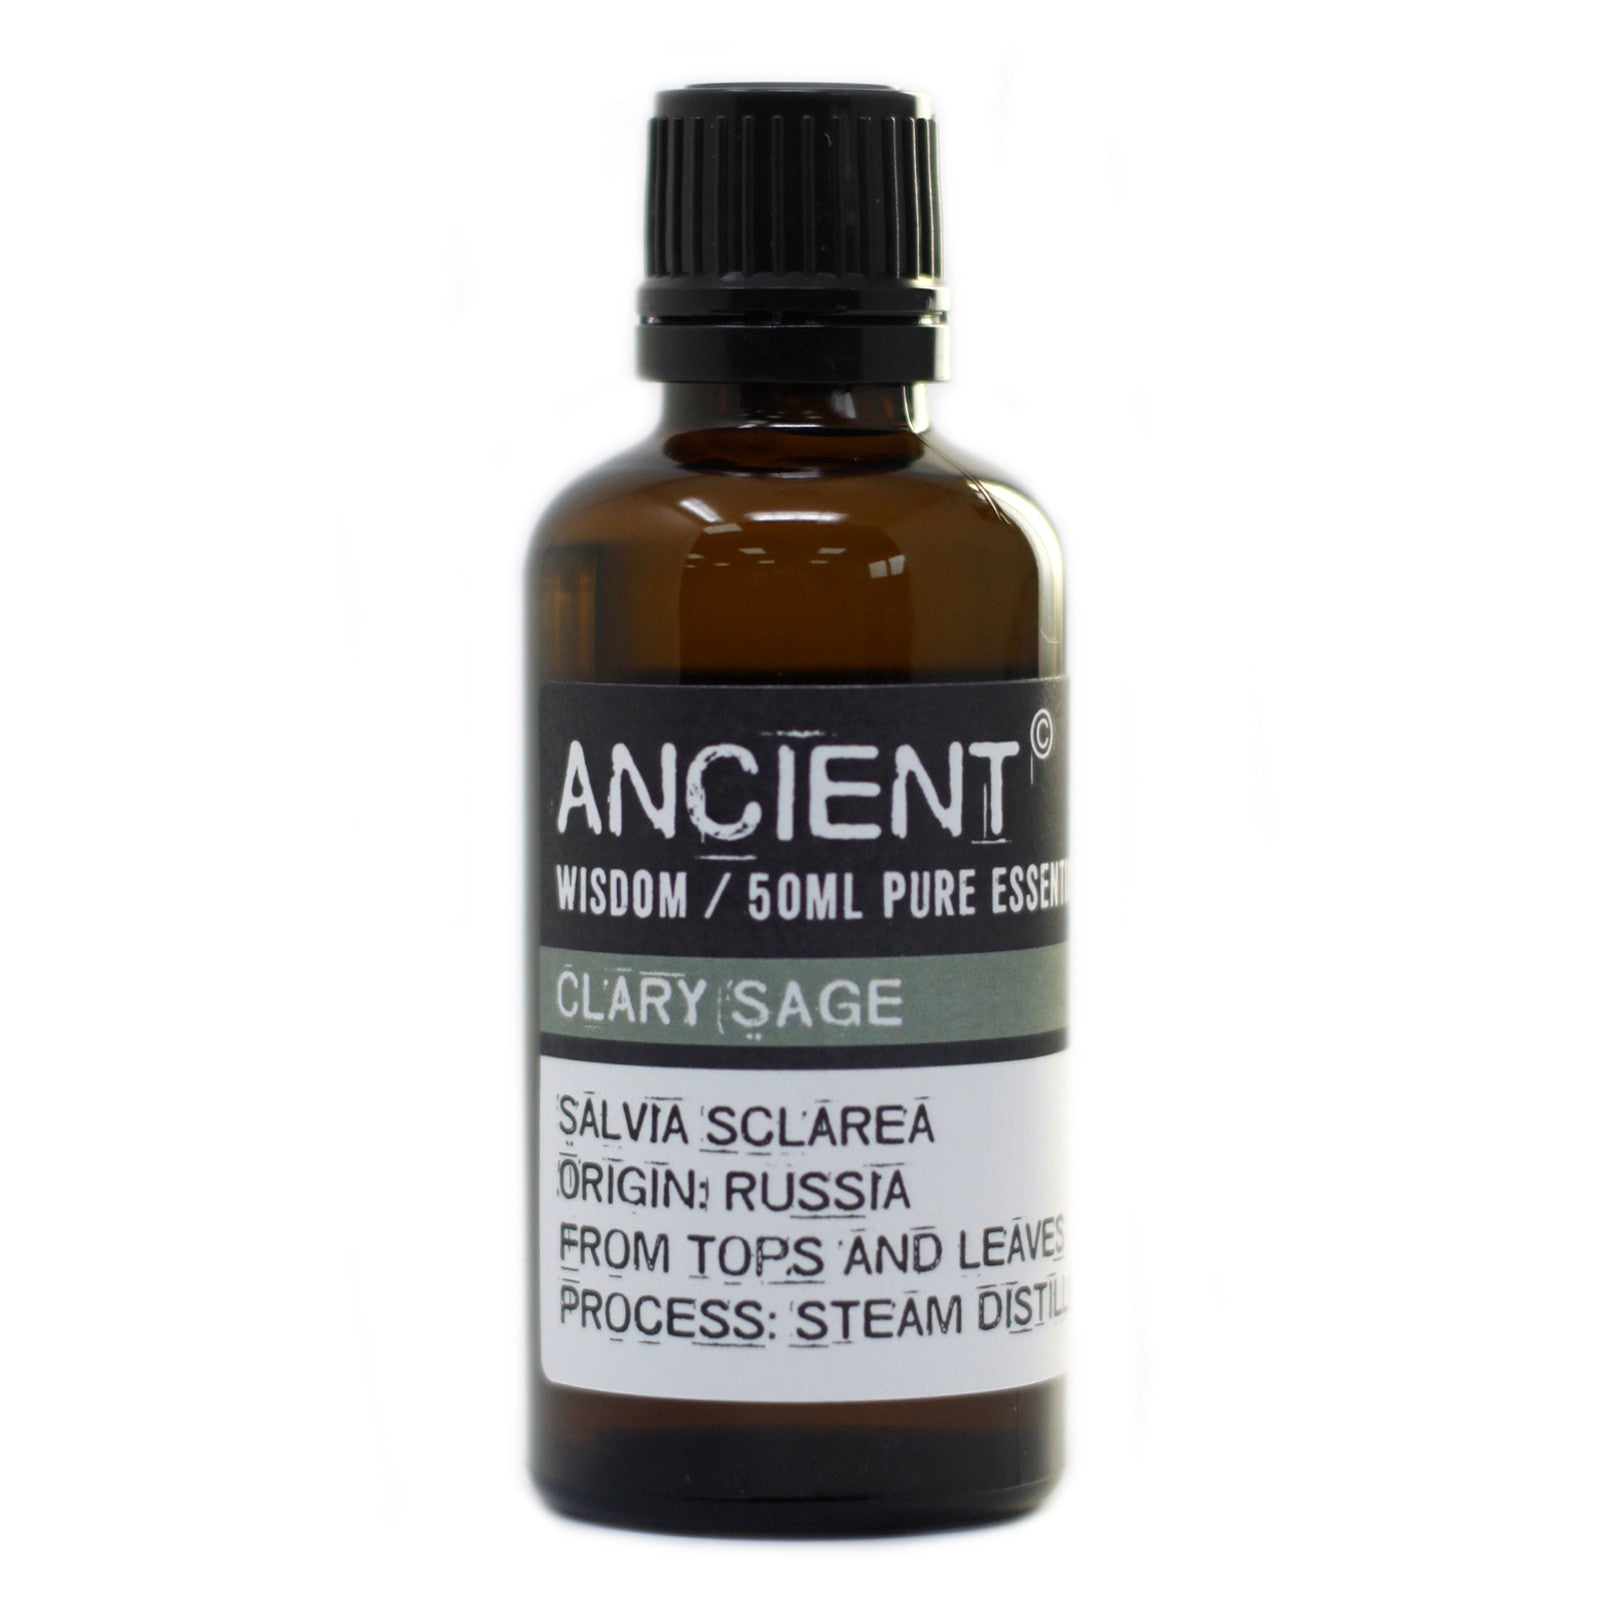 View Clary Sage 50ml information